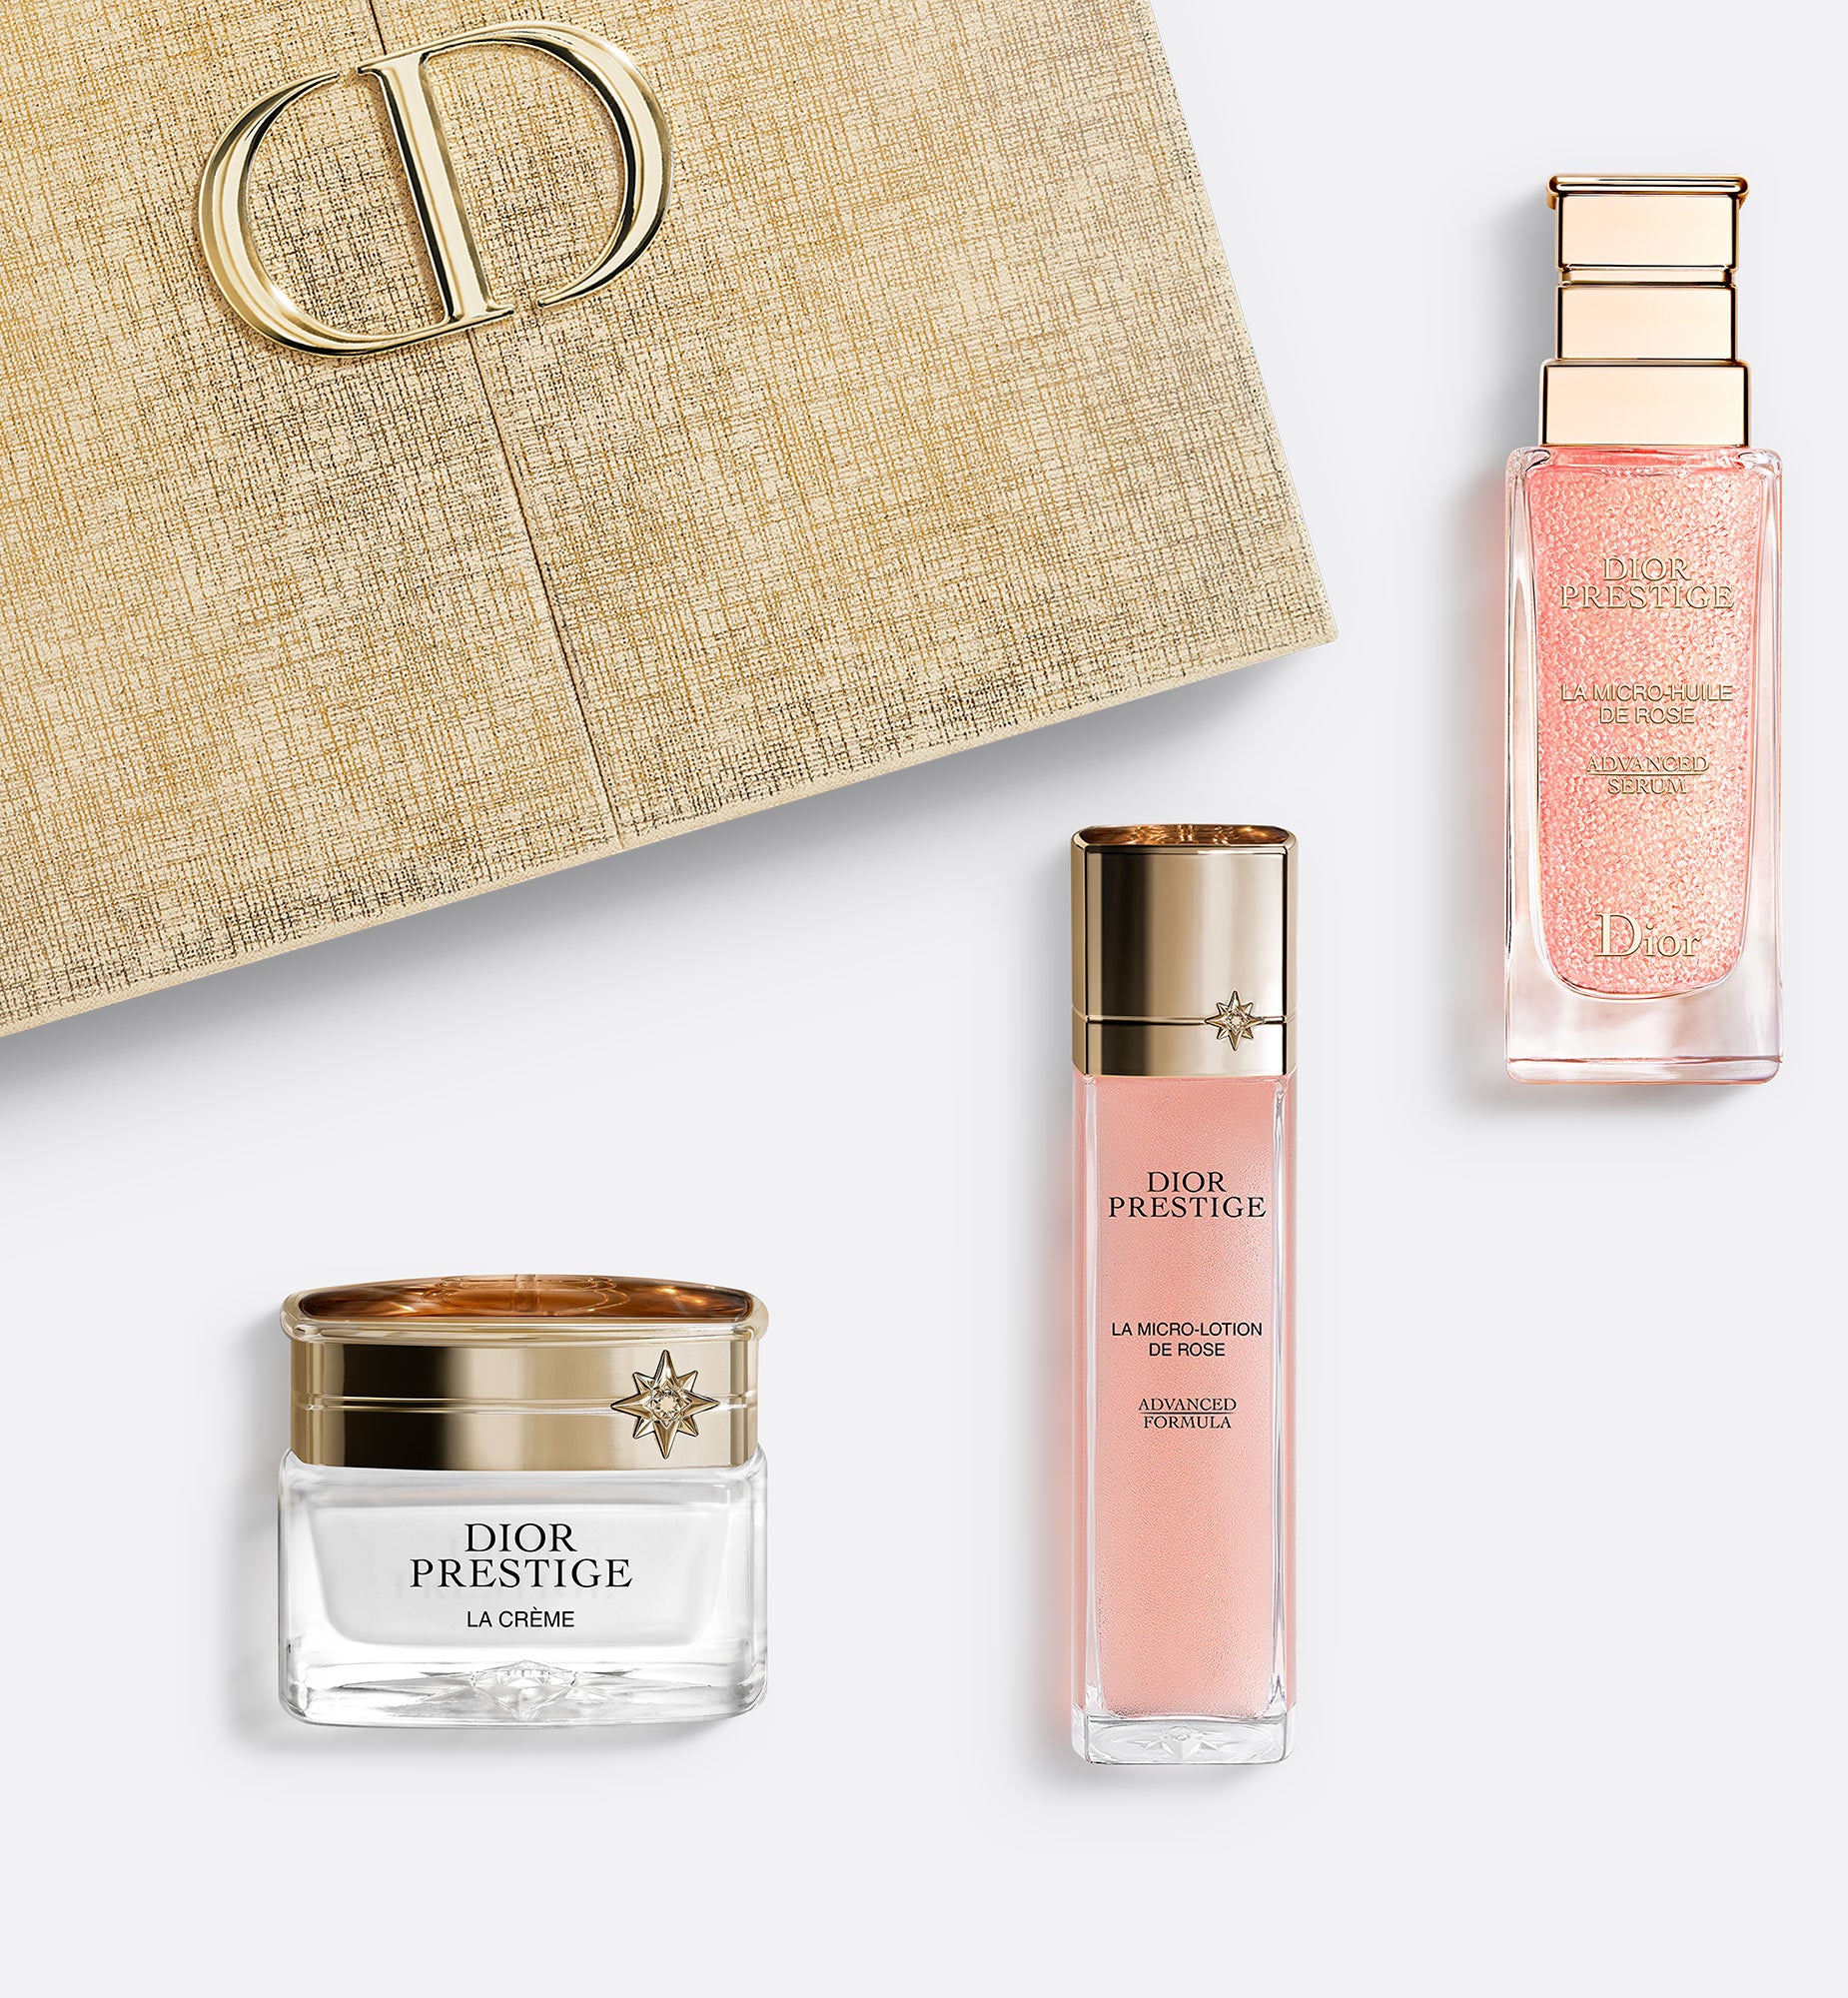 Dior Prestige Set - Limited Edition | The Exceptional Revitalizing Skincare Ritual - 3 Products